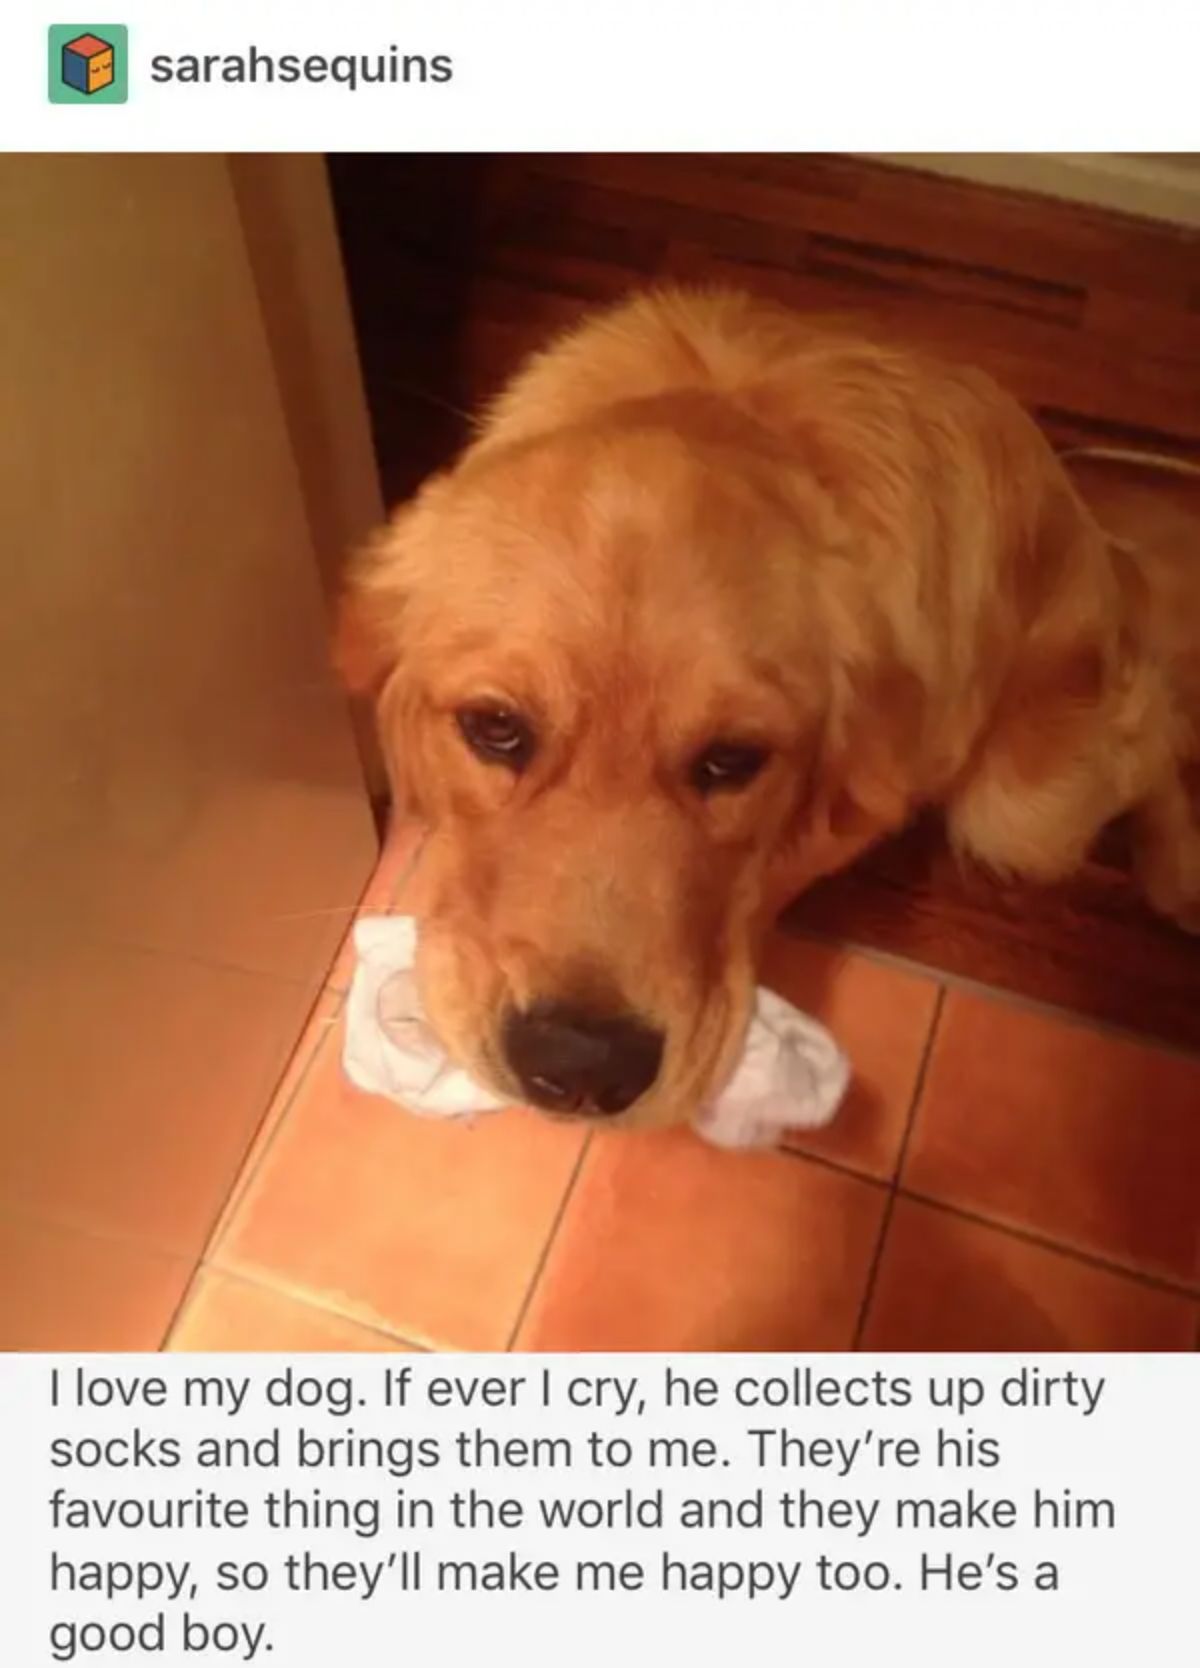 golden retriever holding white socks on the floor with caption saying he brings dirty socks to the owner when they are crying